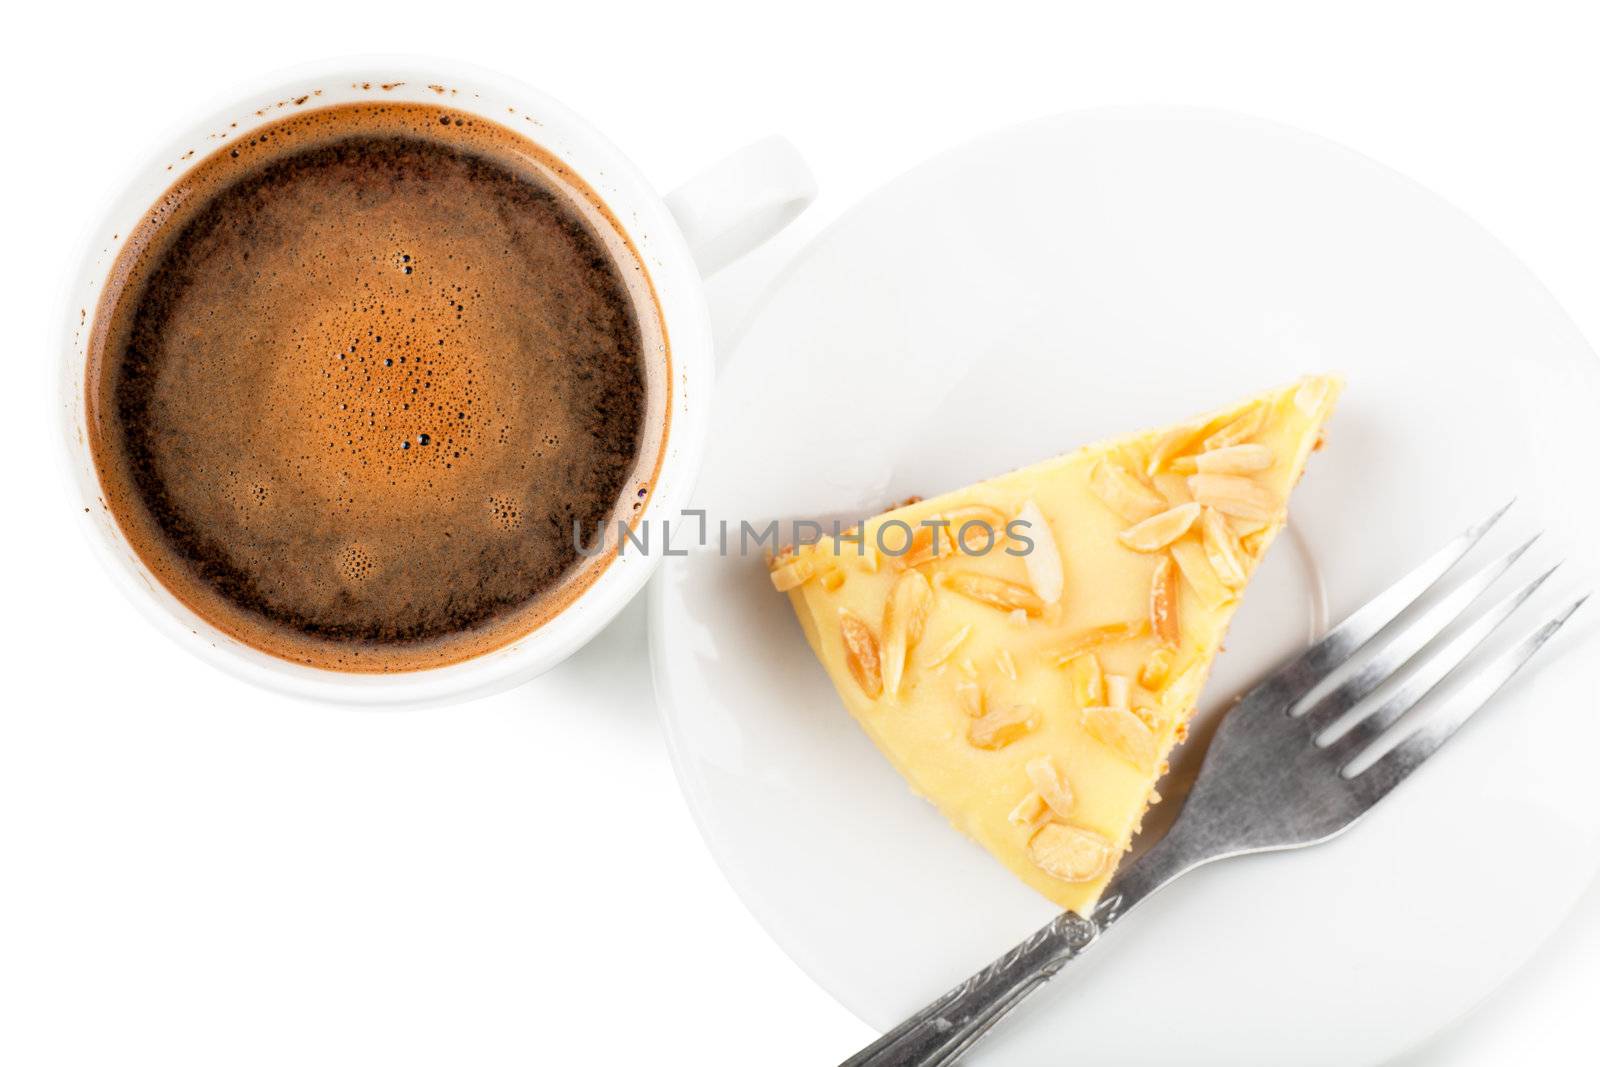 Top view of cup of coffee and pie on a white plate